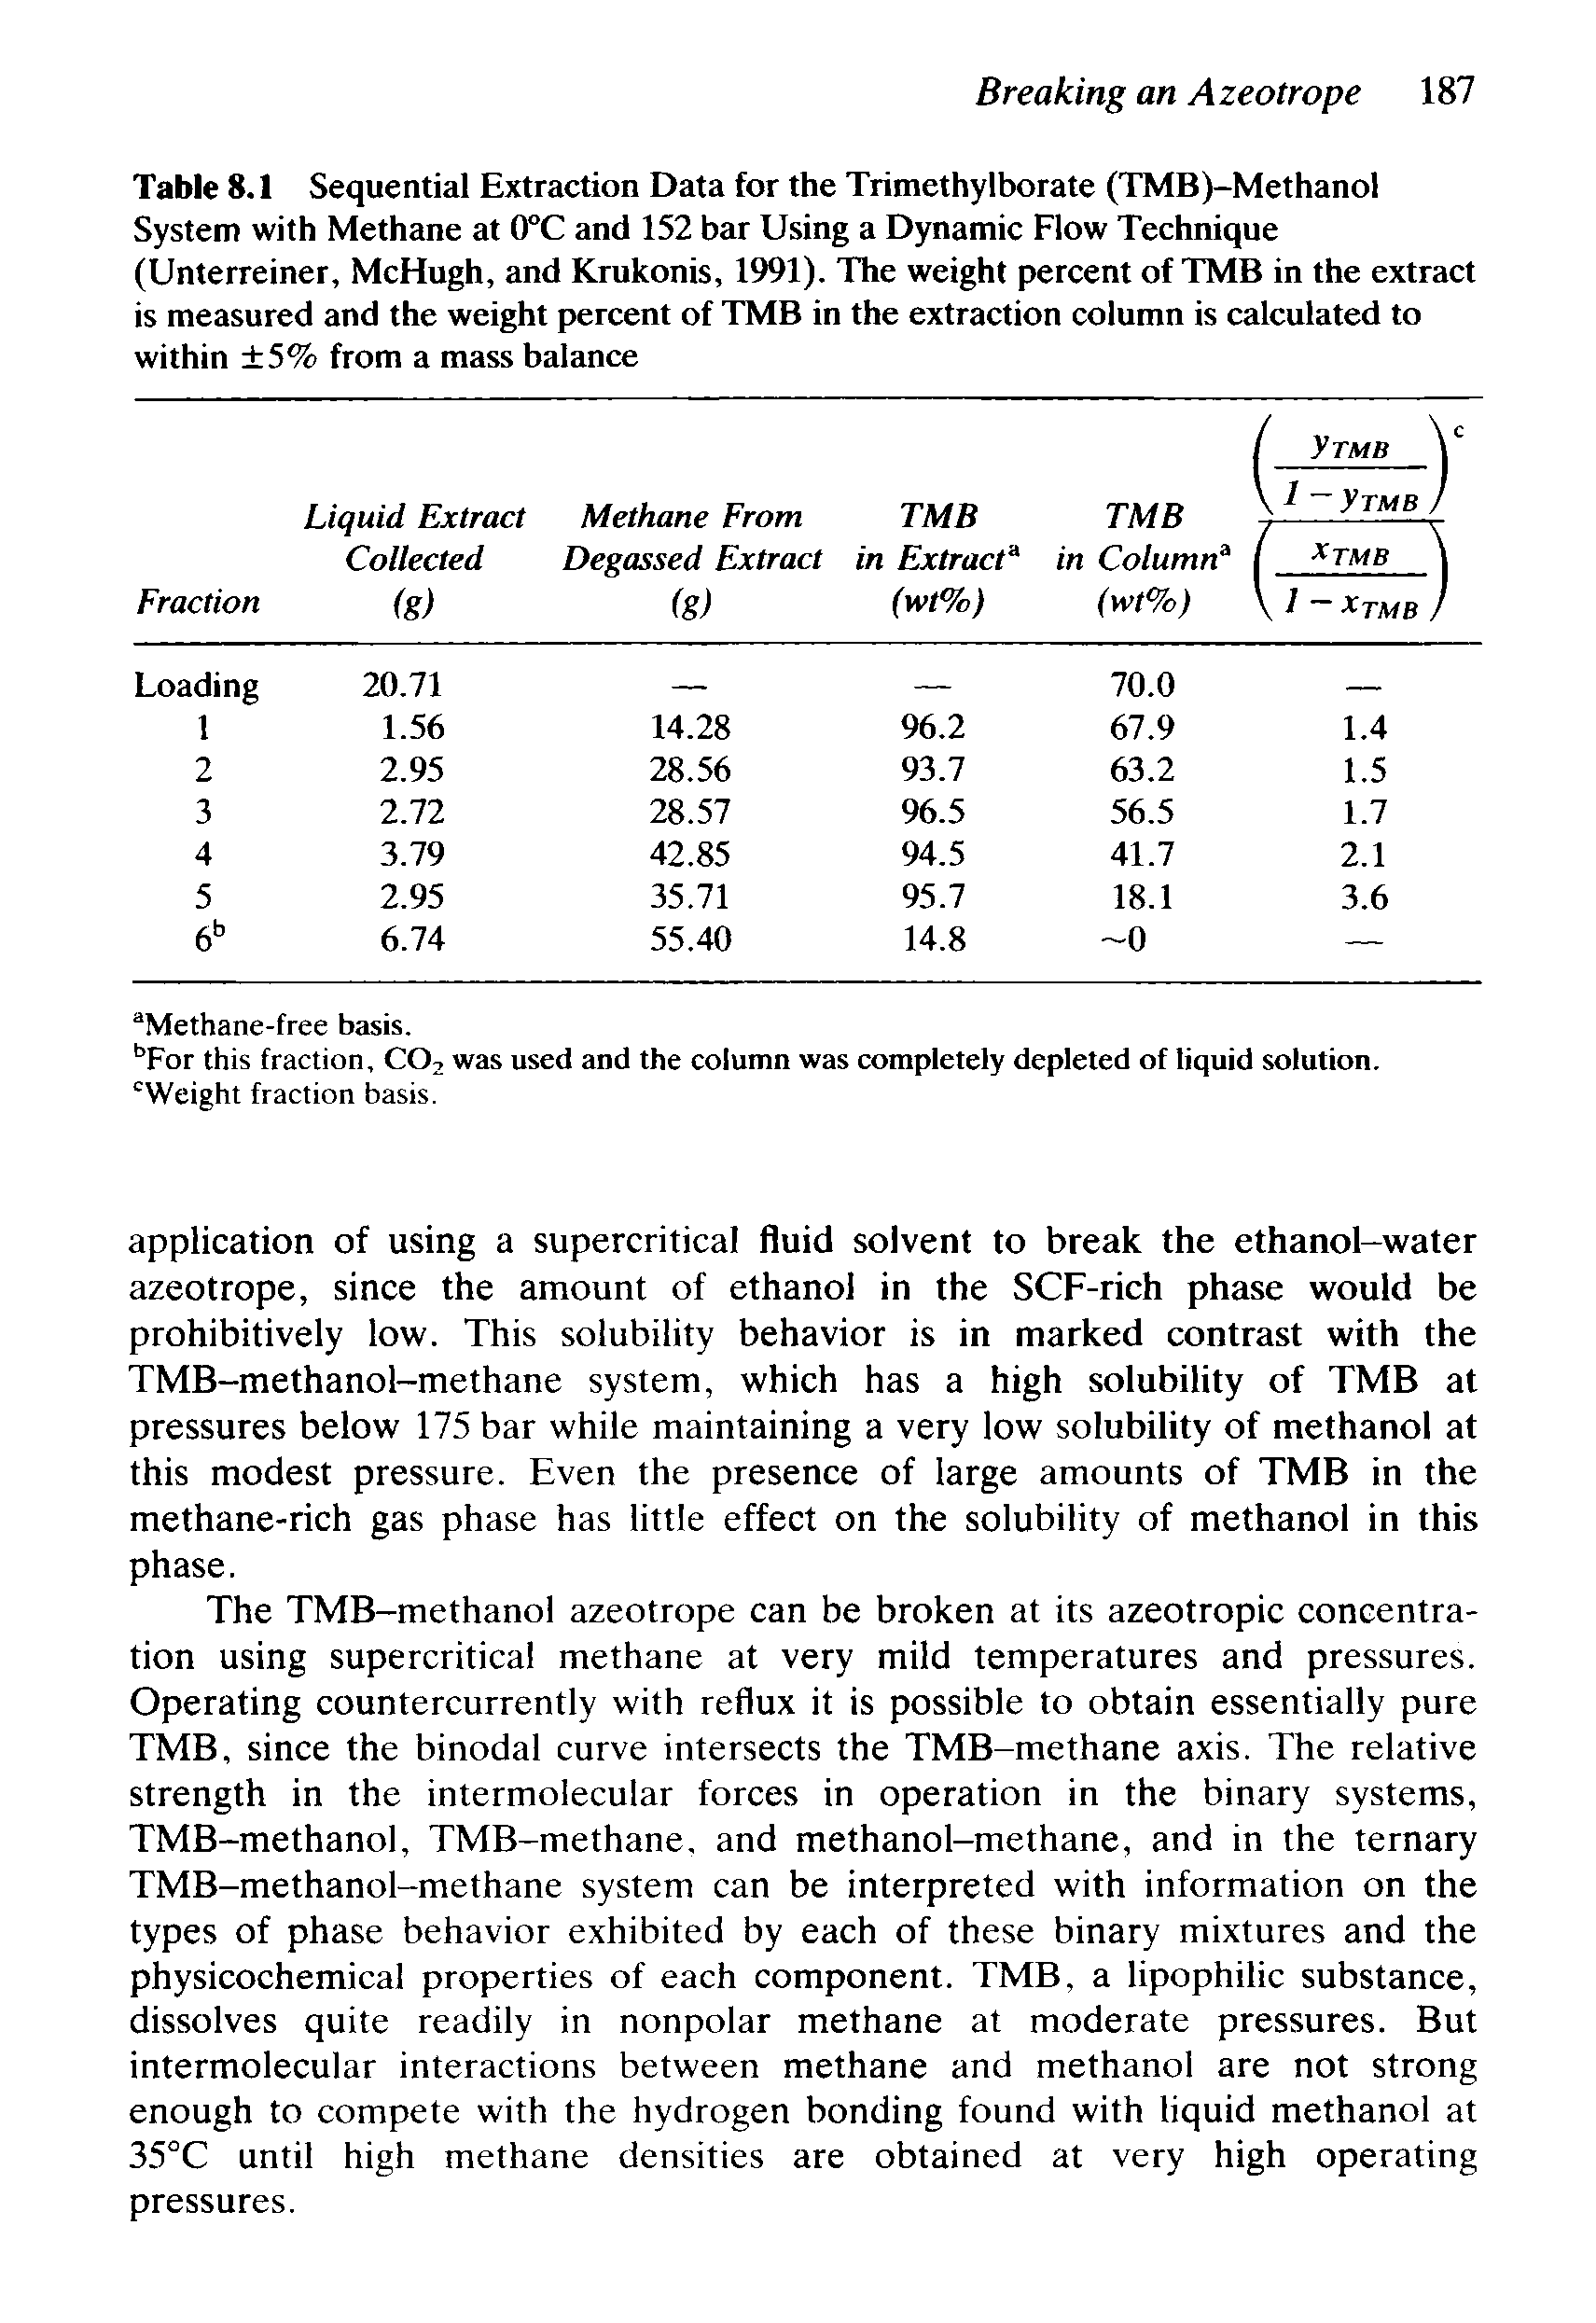 Table 8.1 Sequential Extraction Data for the Trimethylborate (TMB)-Methanol System with Methane at 0°C and 152 bar Using a Dynamic Flow Technique (Unterreiner, McHugh, and Krukonis, 1991). The weight percent of TMB in the extract is measured and the weight percent of TMB in the extraction column is calculated to within 5% from a mass balance...